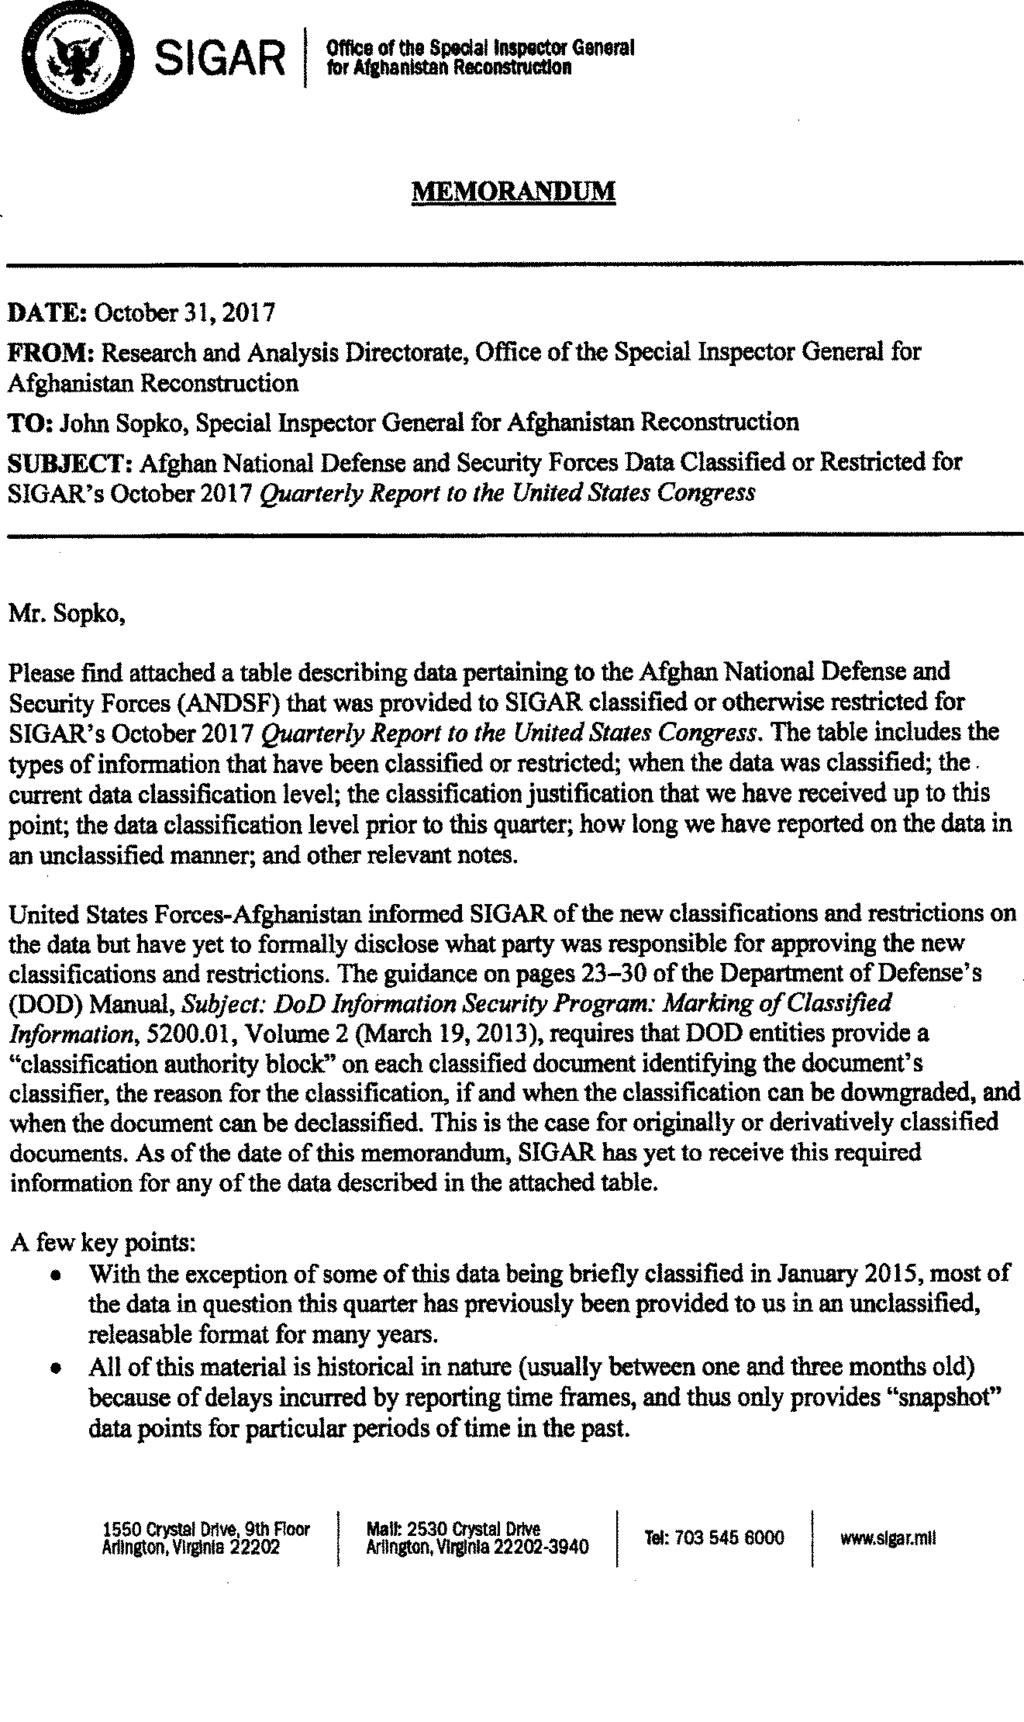 47 1'::\ SIGAR I OfficeoftheSpeclallnspectorGaneral ~ tor Af&hanistan Reconstruellon MEMORANQUM DATE: October31, 2017 FROM: Research and Analysis Directorate, Office of the Special Inspector General